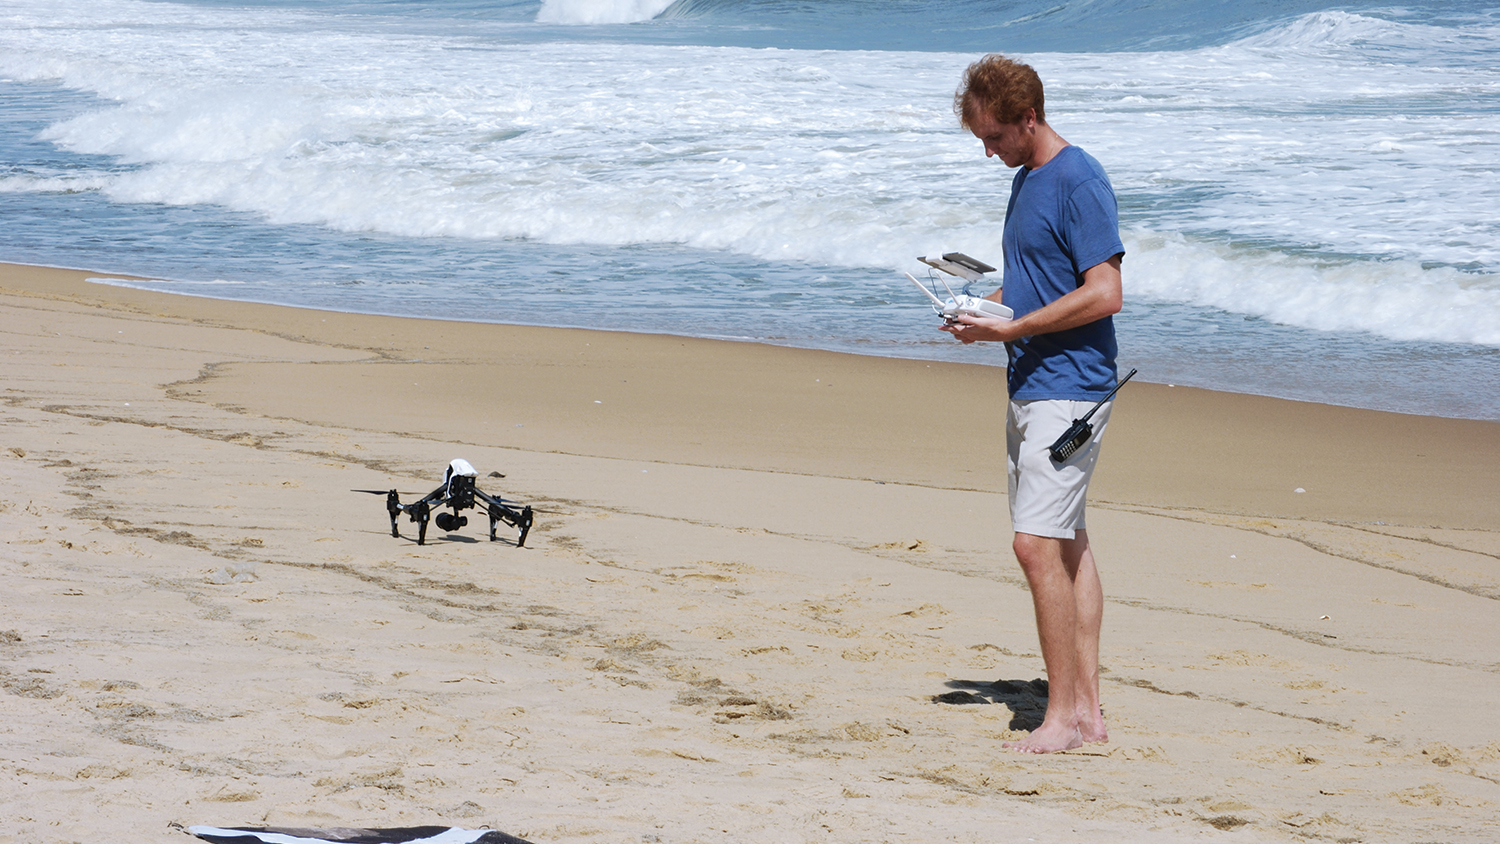 Member of the research team operates drone to evaluate the topographic surface and conduct geospatial analysis.